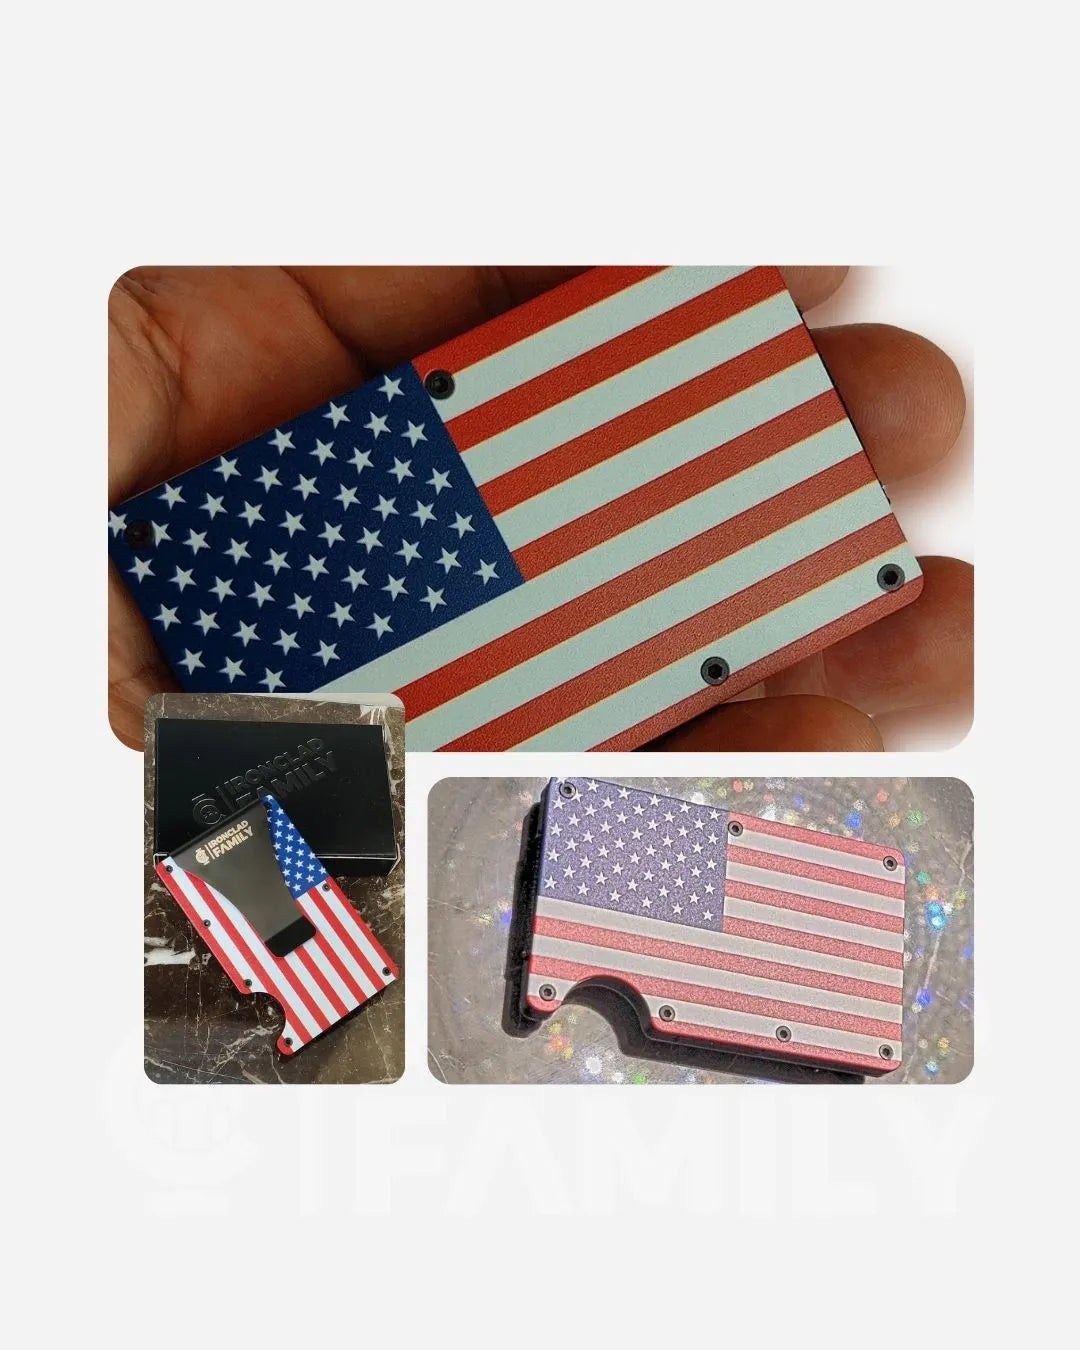 Credit card featuring an American flag design inside the metal wallet